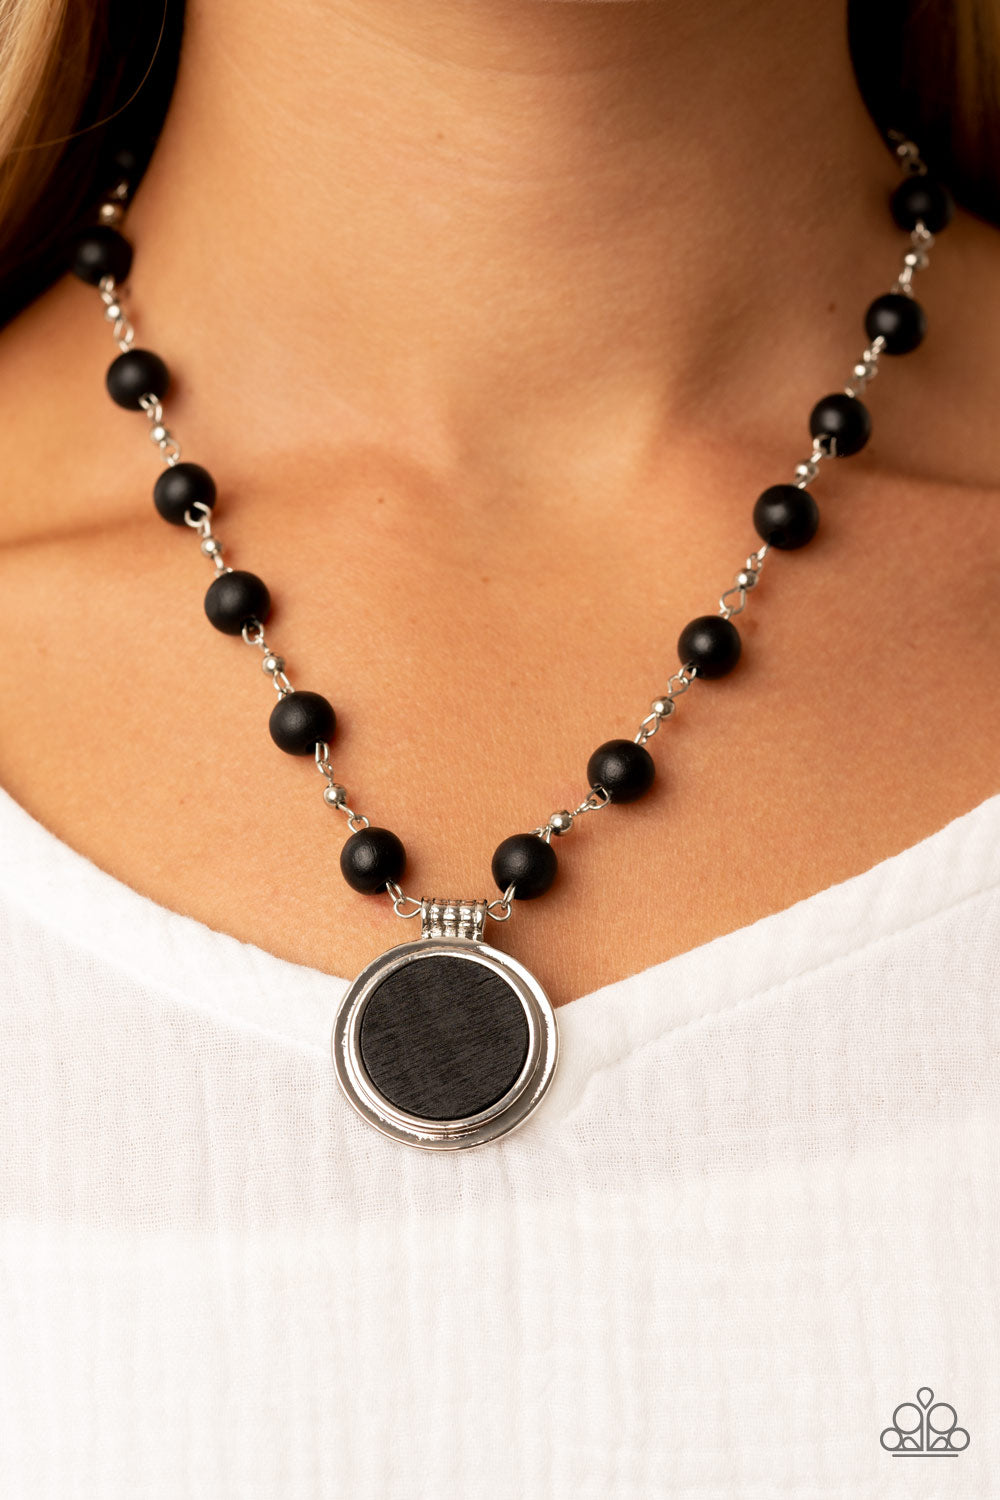 Soulful Sunrise Black Necklace - Paparazzi Accessories  Infused with dainty silver chains, a collection of black wooden beads link into an earthy chain below the collar. Featuring a textured silver fitting, a flat black wooden disc is pressed into a silver frame, resulting in a naturally refined pendant. Features an adjustable clasp closure.  Sold as one individual necklace. Includes one pair of matching earrings.